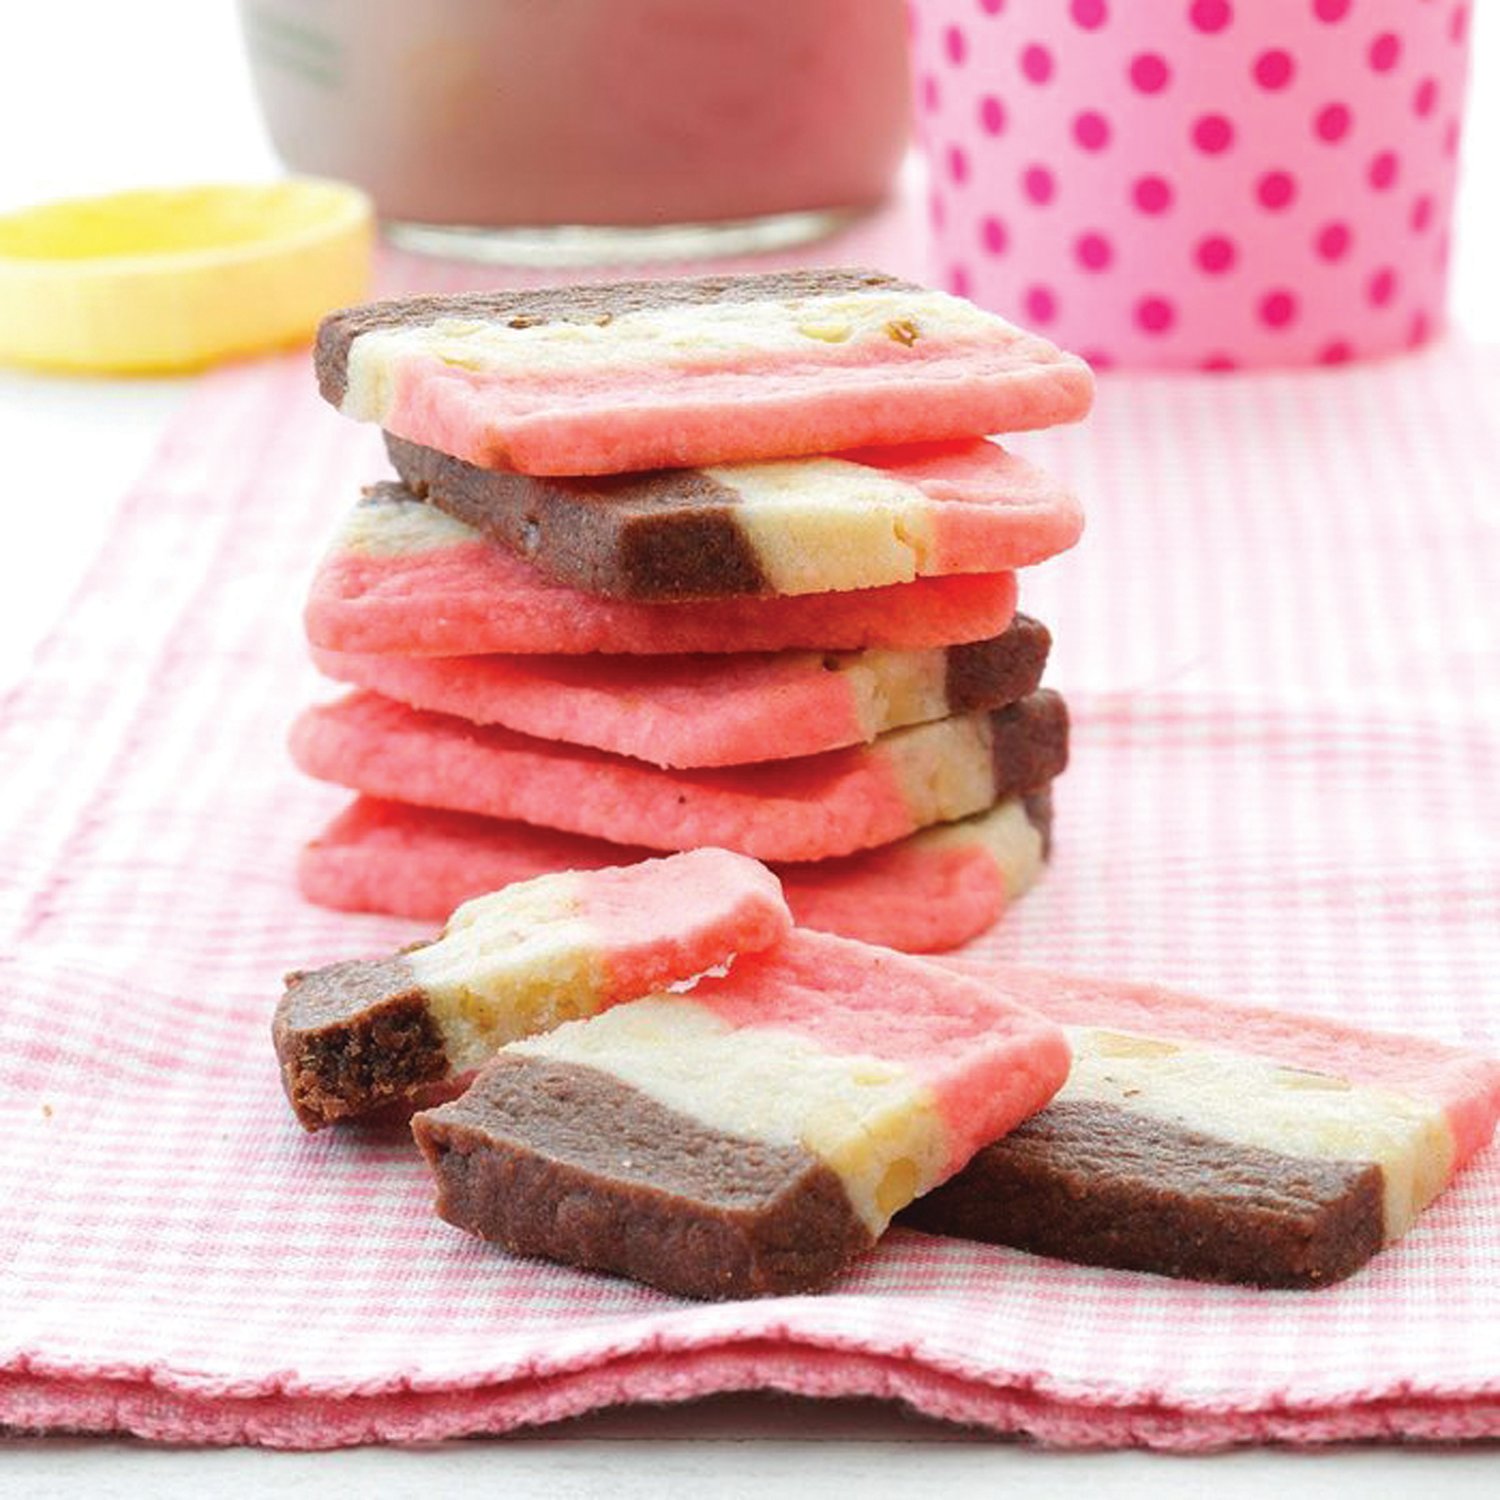 Neapolitan cookies are colorful and fun. The colors and flavorings can be changed to suit personal preferences.